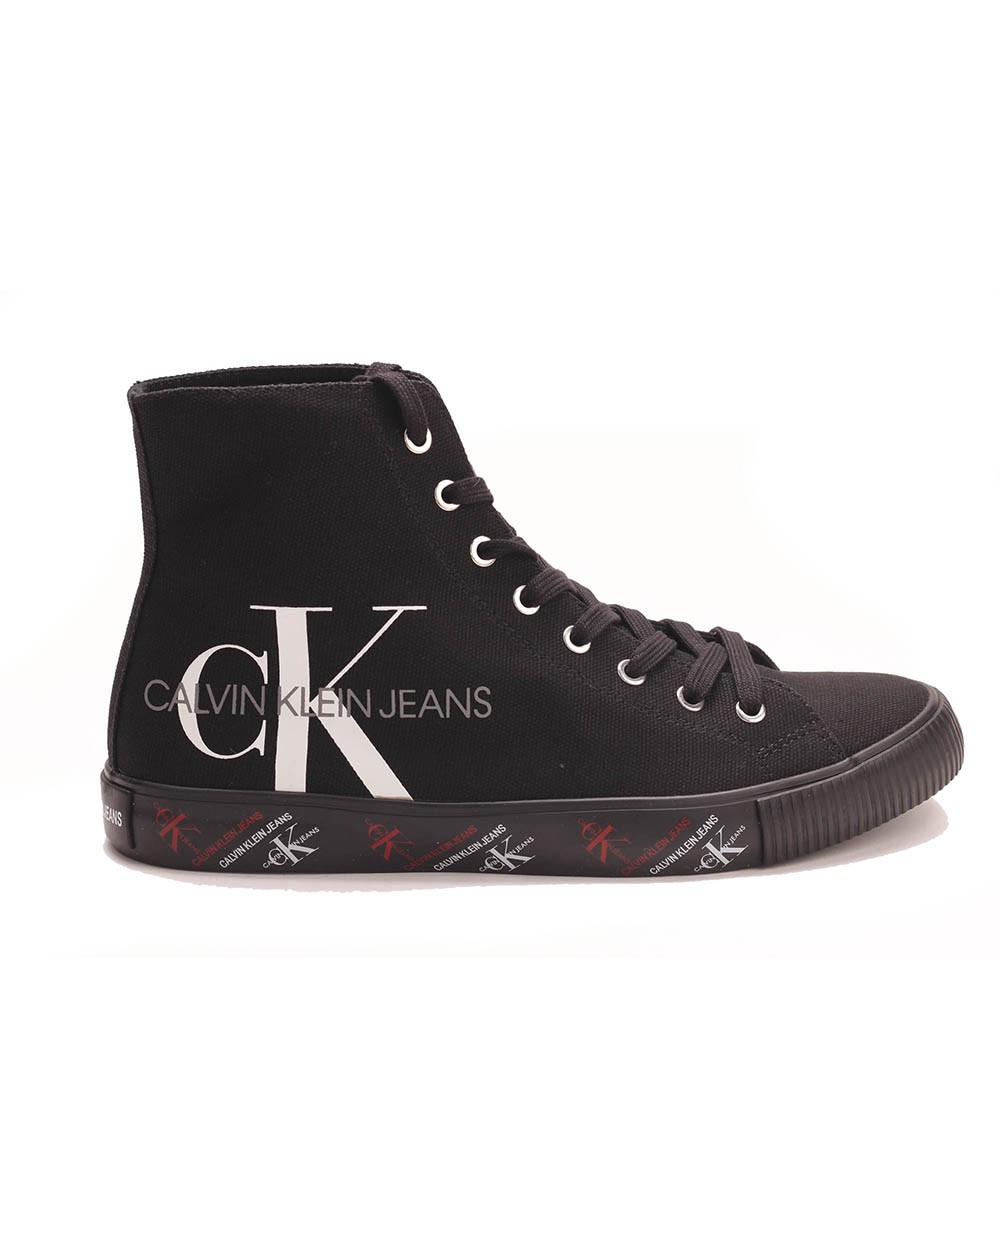 CALVIN KLEIN JEANS B4S0669 - Trainers